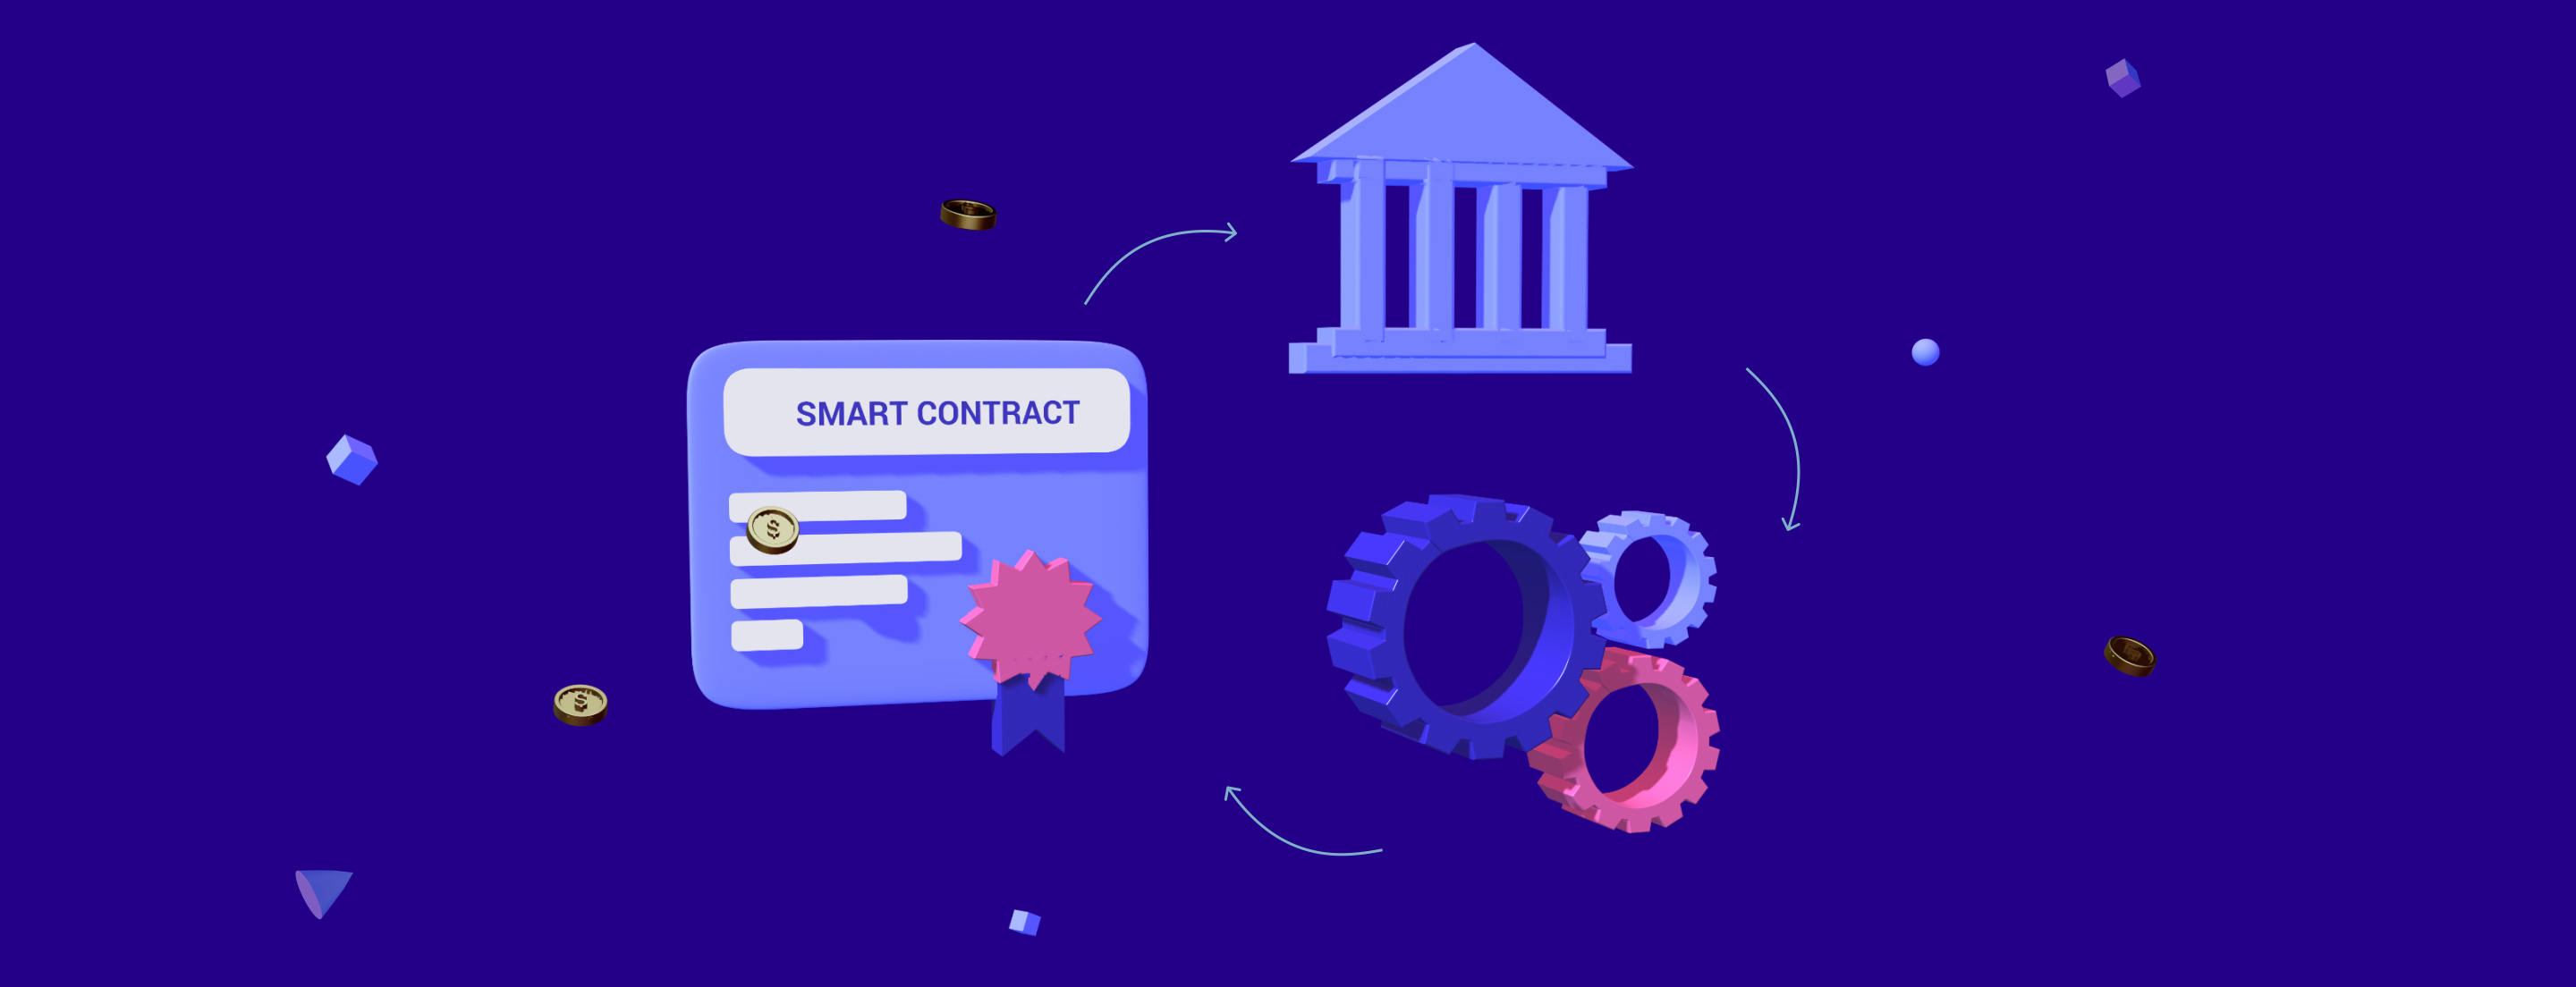 How Smart Contracts Work For Sale A House